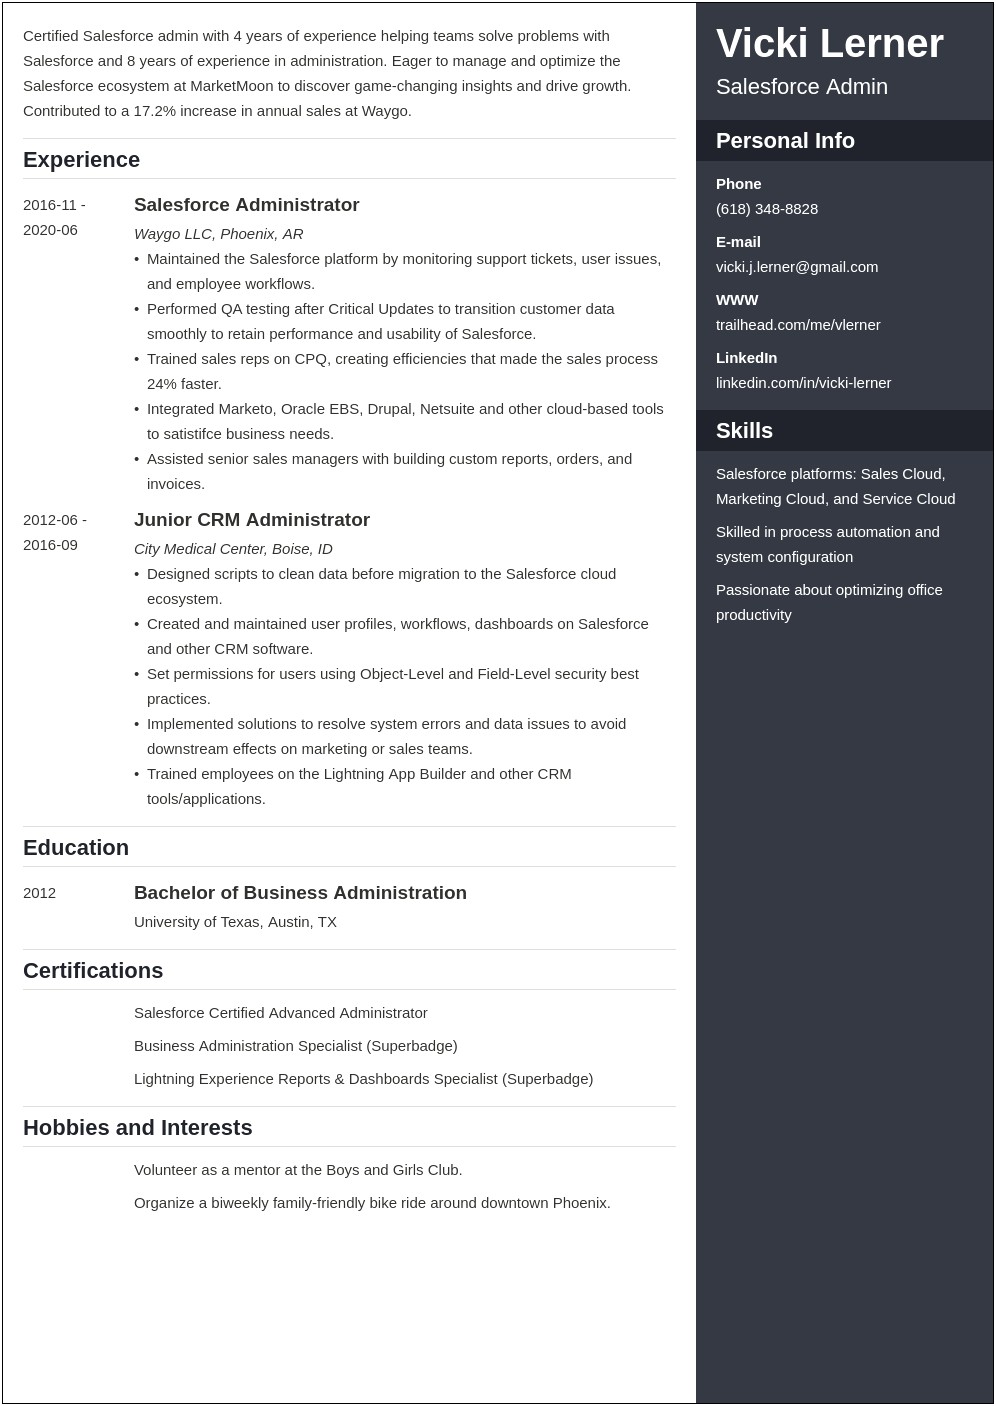 Certified Salesforce Administrator Resume Examples